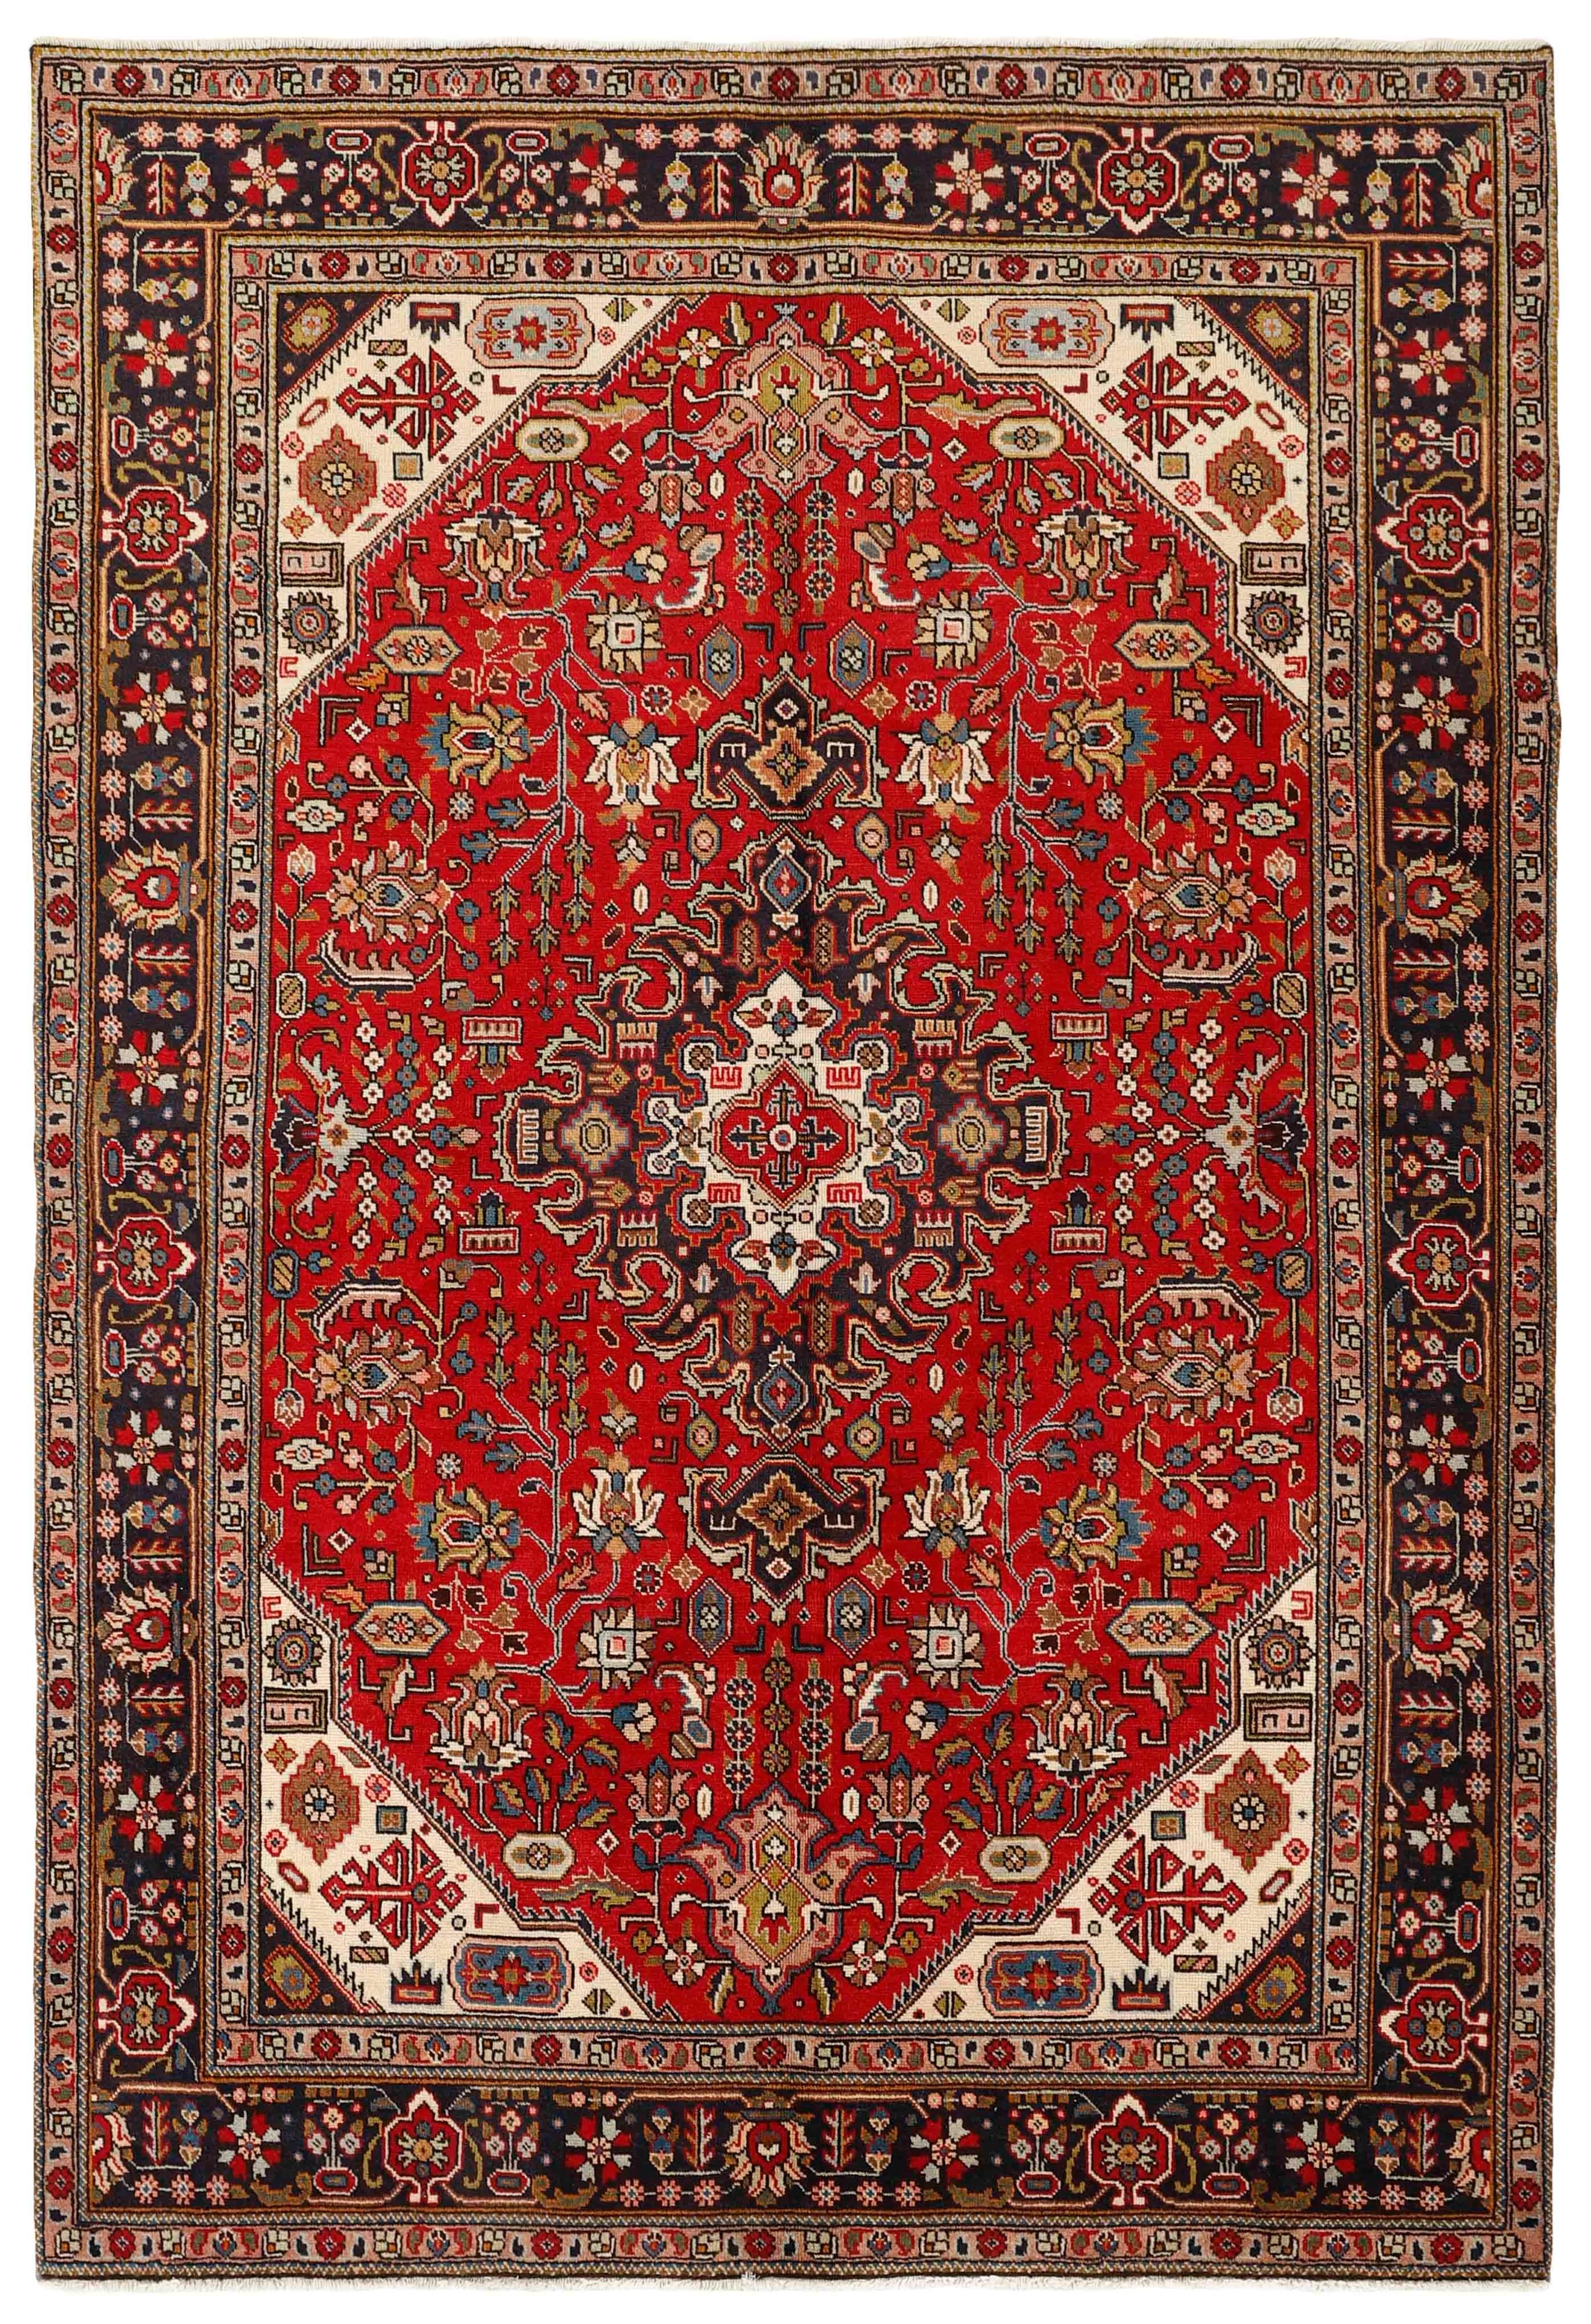 Authentic persian rug with traditional floral design in red, black and beige